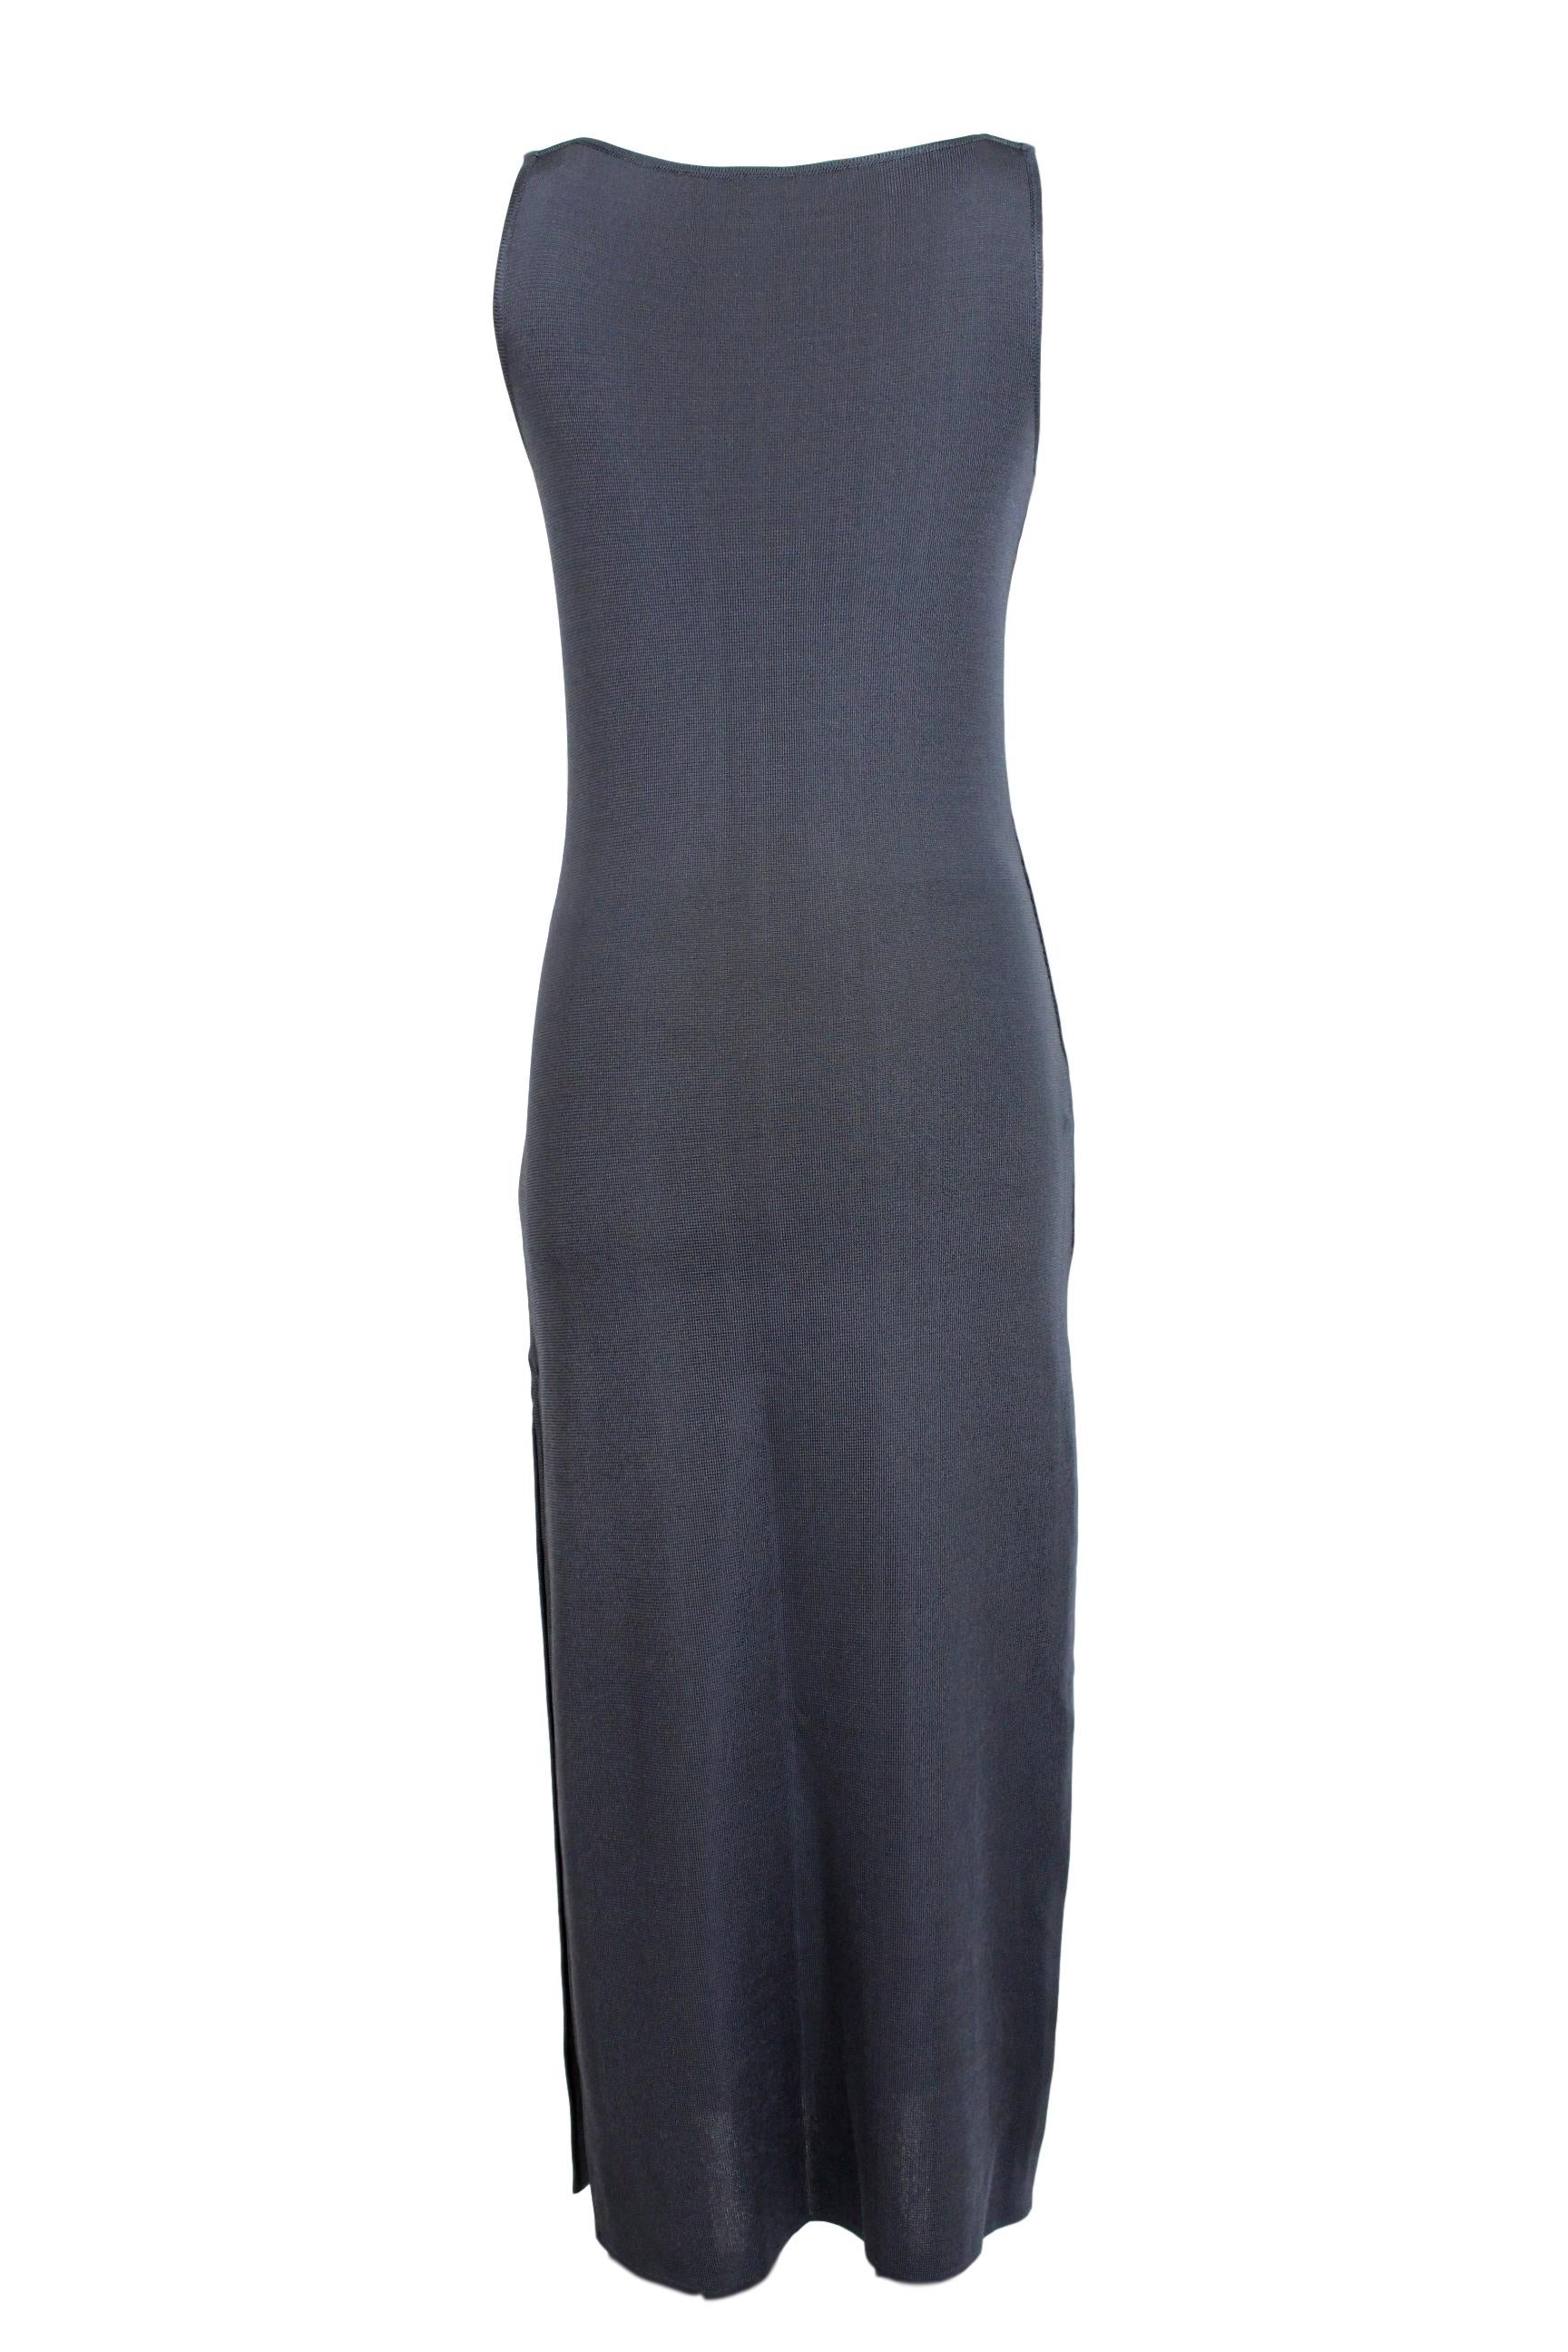 Gianfranco Ferre Studio vintage 90s evening dress. Long, fitted sheath model with side slit. Straps covered with sequins. Gray color, 100% viscose. Made in Italy. Excellent vintage conditions.

Size: 42 It 8 Us 10 Uk

Shoulder: 40 cm

Bust / Chest: